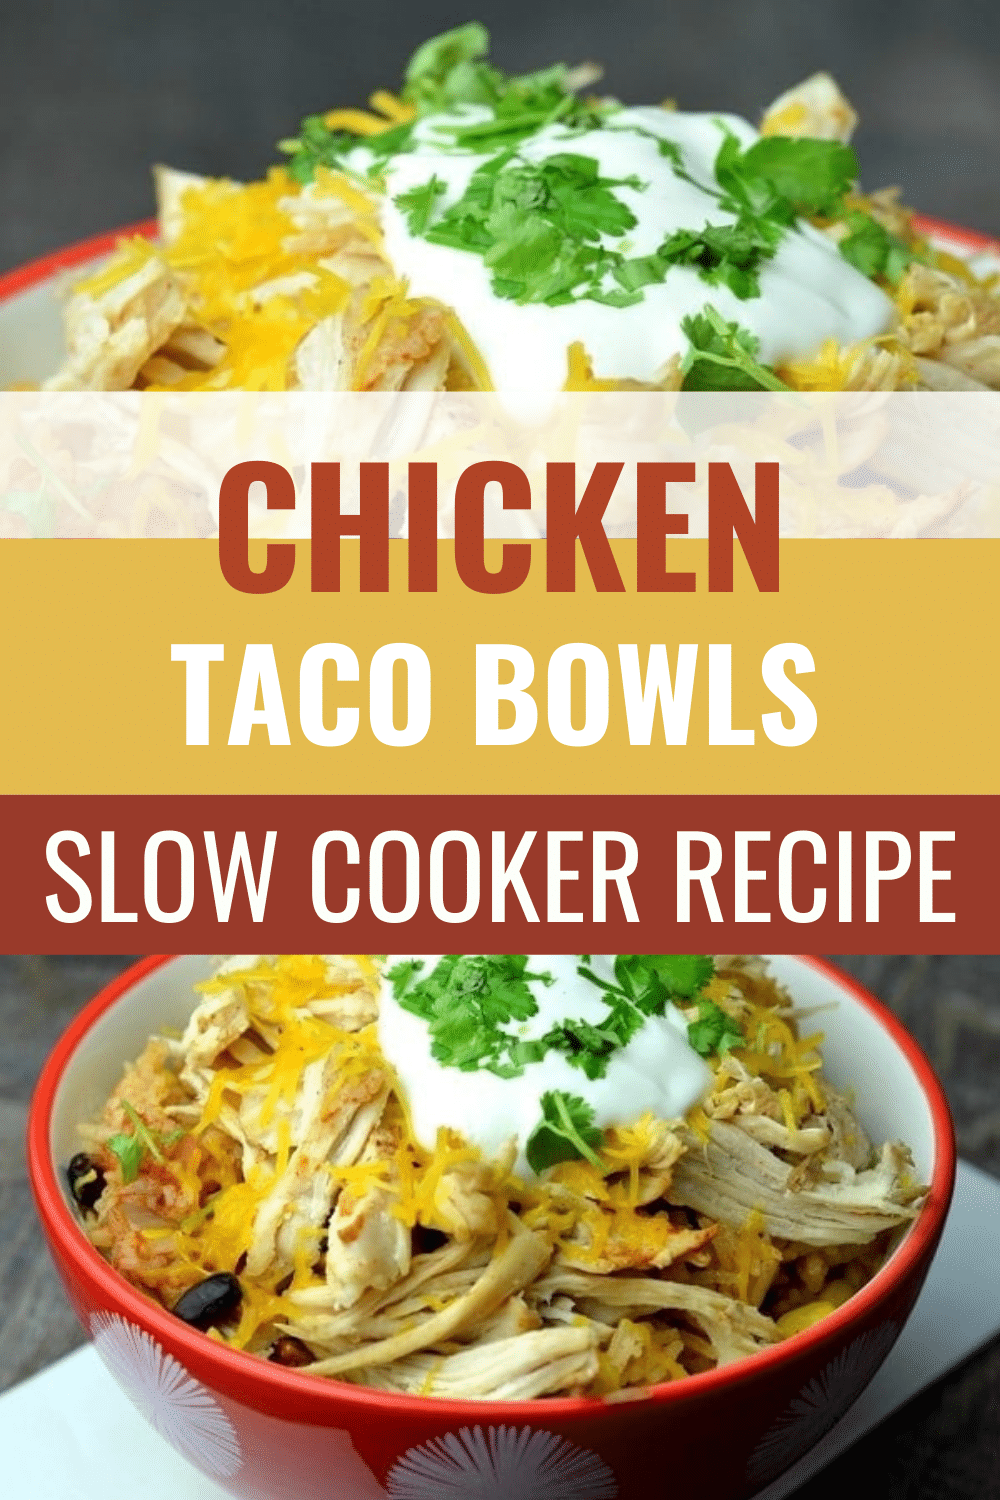 These chicken taco bowls are super easy to make in an Instant Pot or slow cooker. If you love Tex Mex, you probably have all the ingredients on hand! #instantpot #slowcooker #chicken #taco via @wondermomwannab